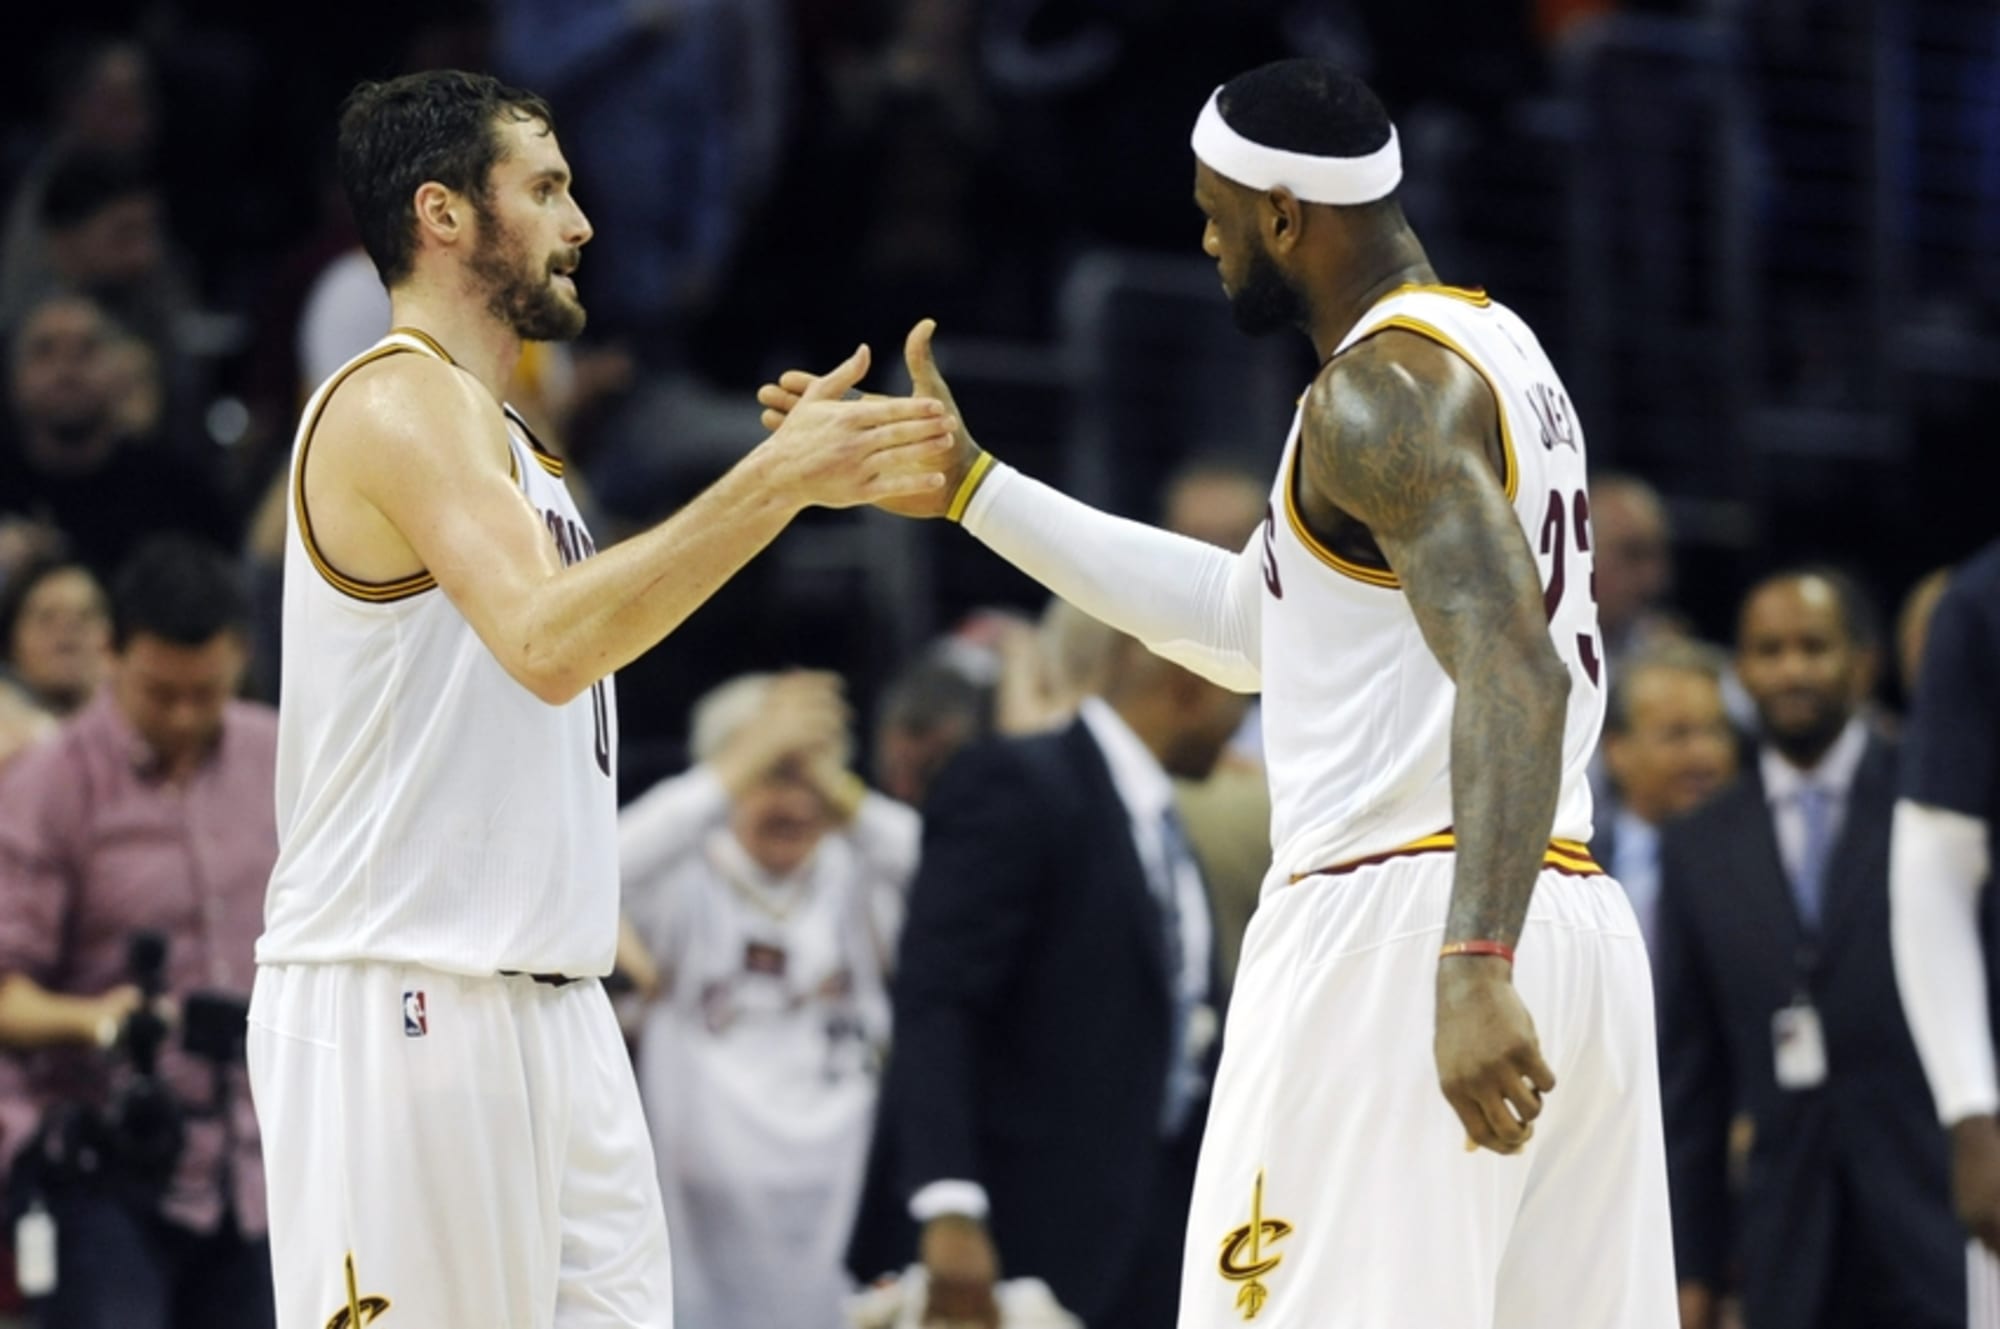 Meet the 2013-14 Cleveland Cavaliers 